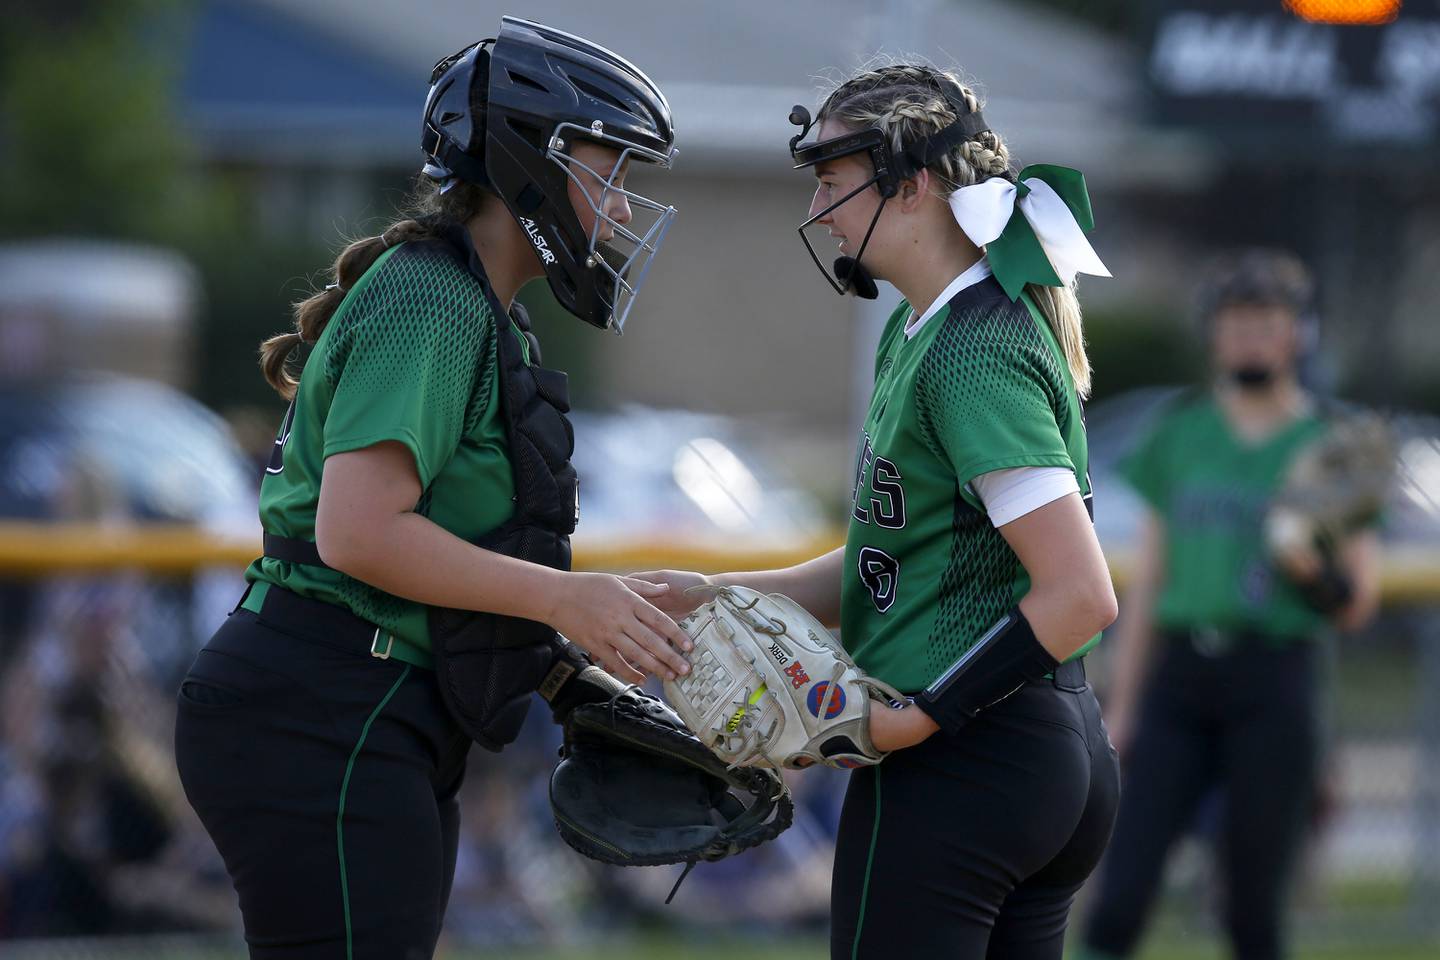 York’s catcher Rena Sotos speaks with pitcher Lauren Derkowski during their softball game against Downers Grove South in Elmhurst on Wednesday, May 26, 2021.